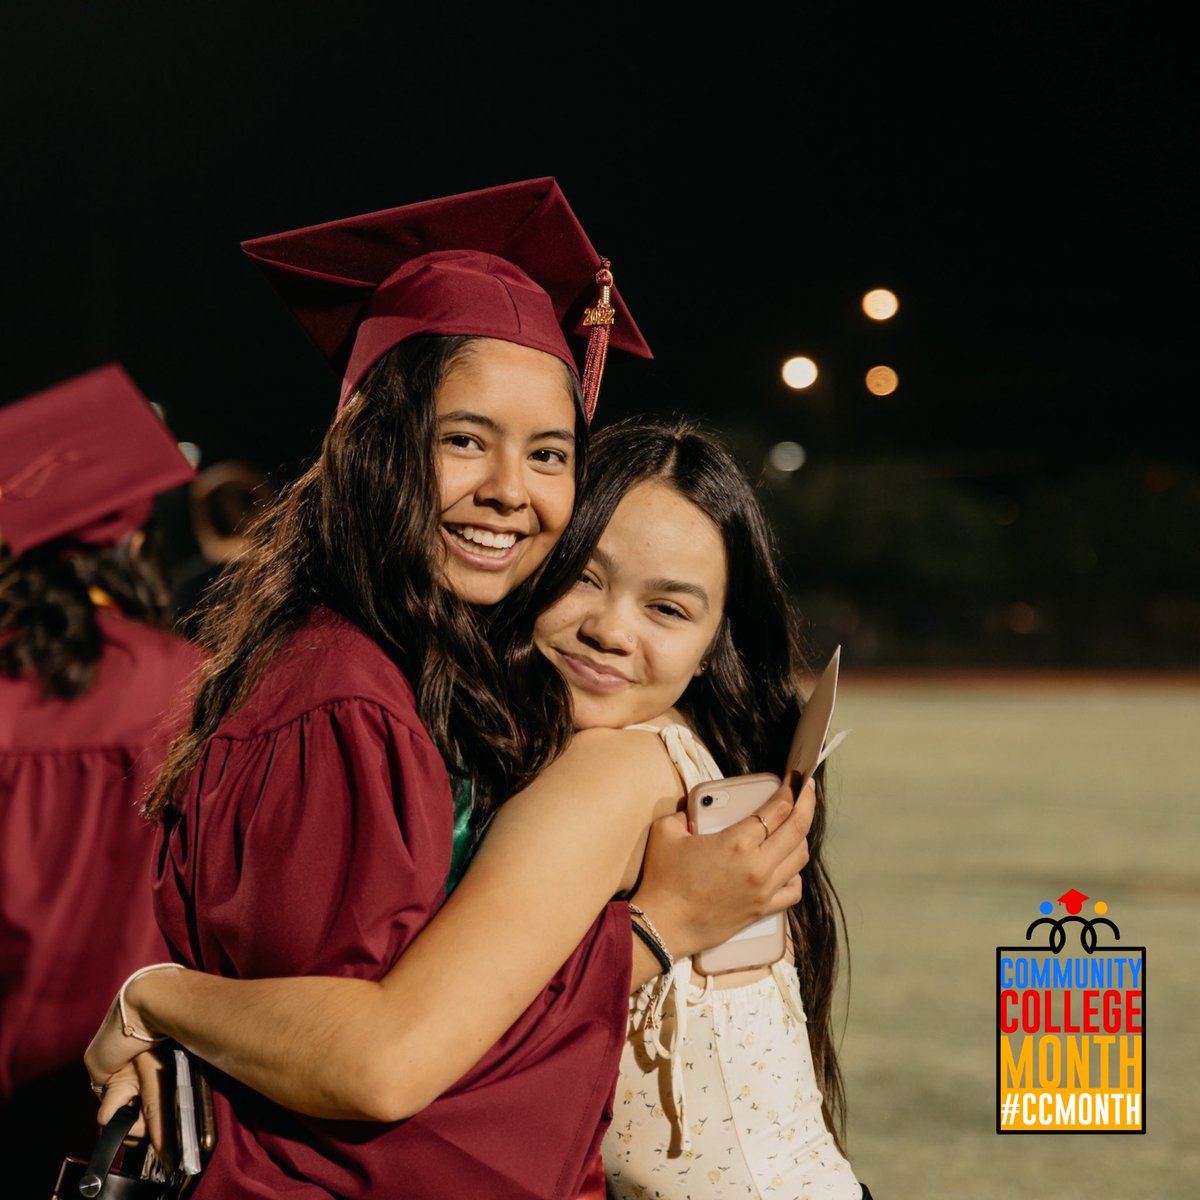 April is national Community College Month which gives us an opportunity to highlight why community colleges matter, and why YOUR college, Arizona Western, matters to this community. AWC provides opportunities to transform lives and impacts generations to come. #CCmonth